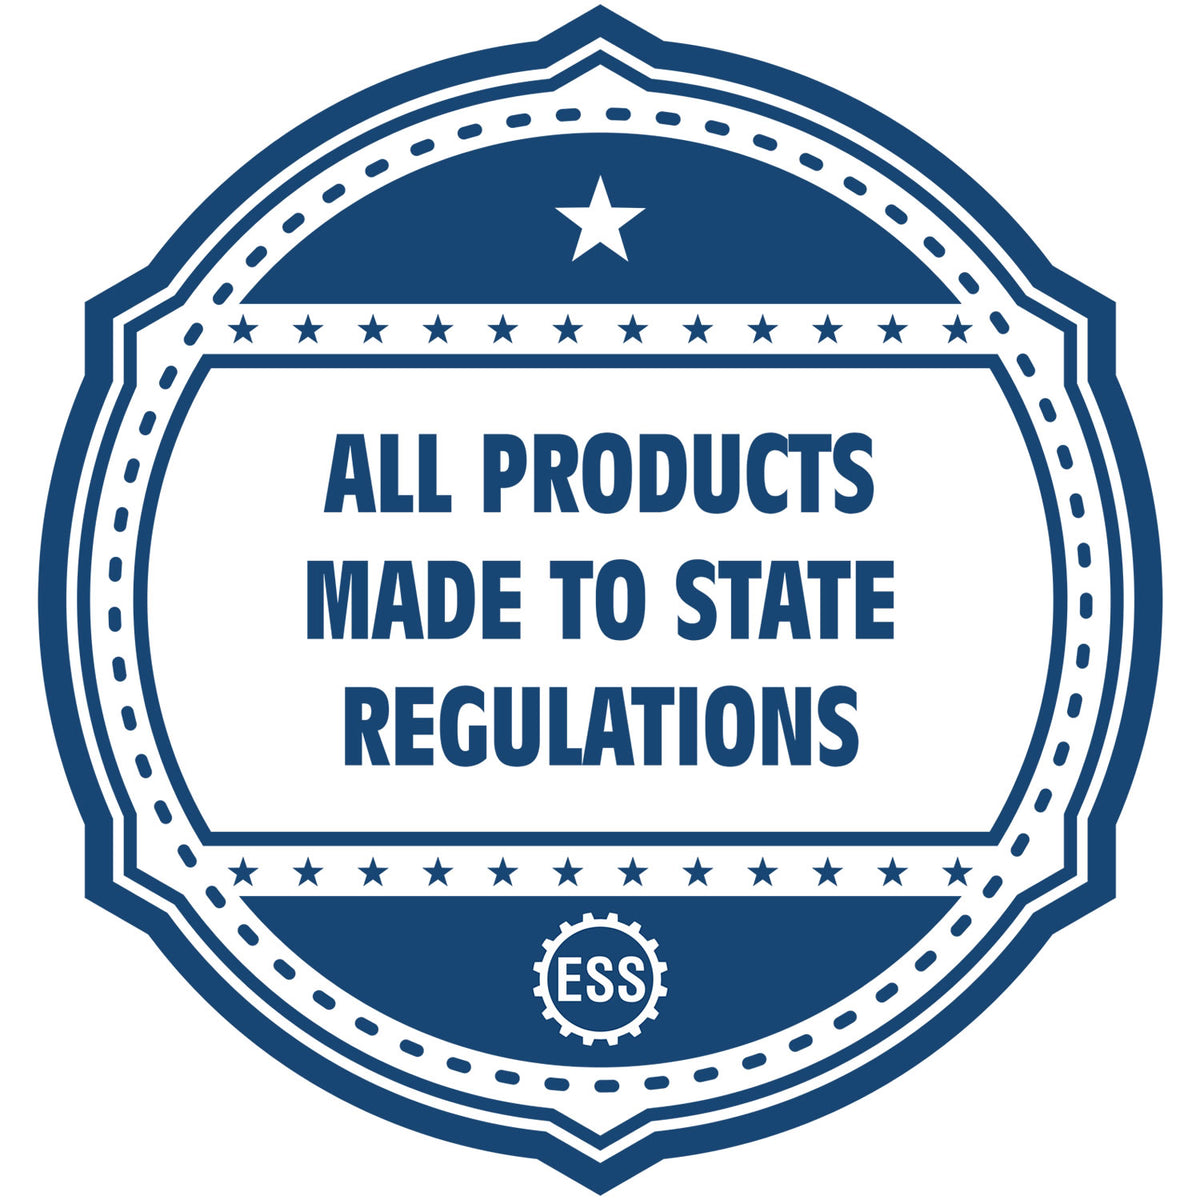 An icon or badge element for the Digital Alaska PE Stamp and Electronic Seal for Alaska Engineer showing that this product is made in compliance with state regulations.